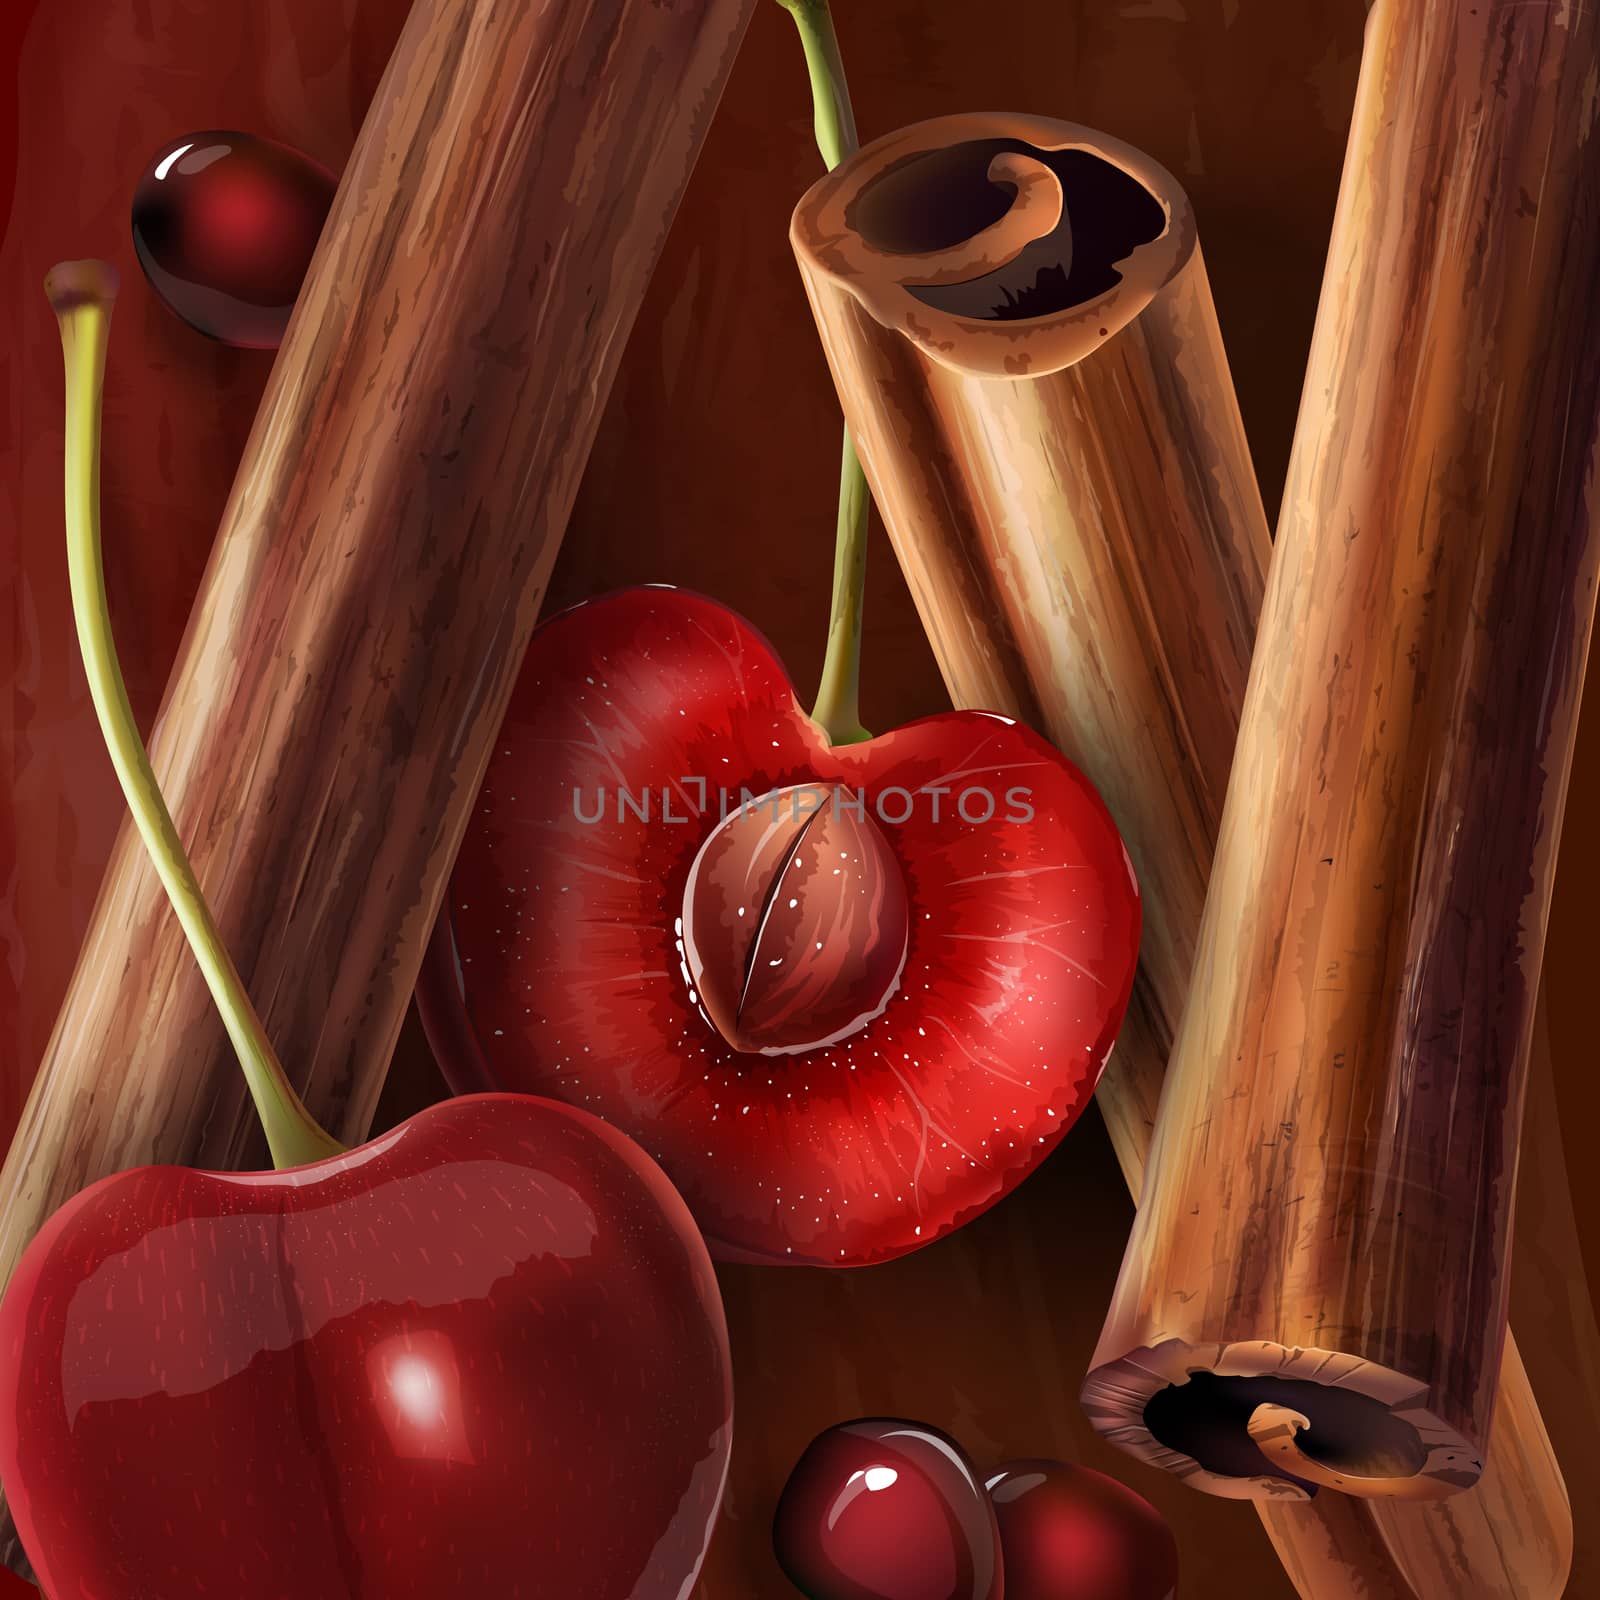 Cinnamon and cherry on a wine-colored background.